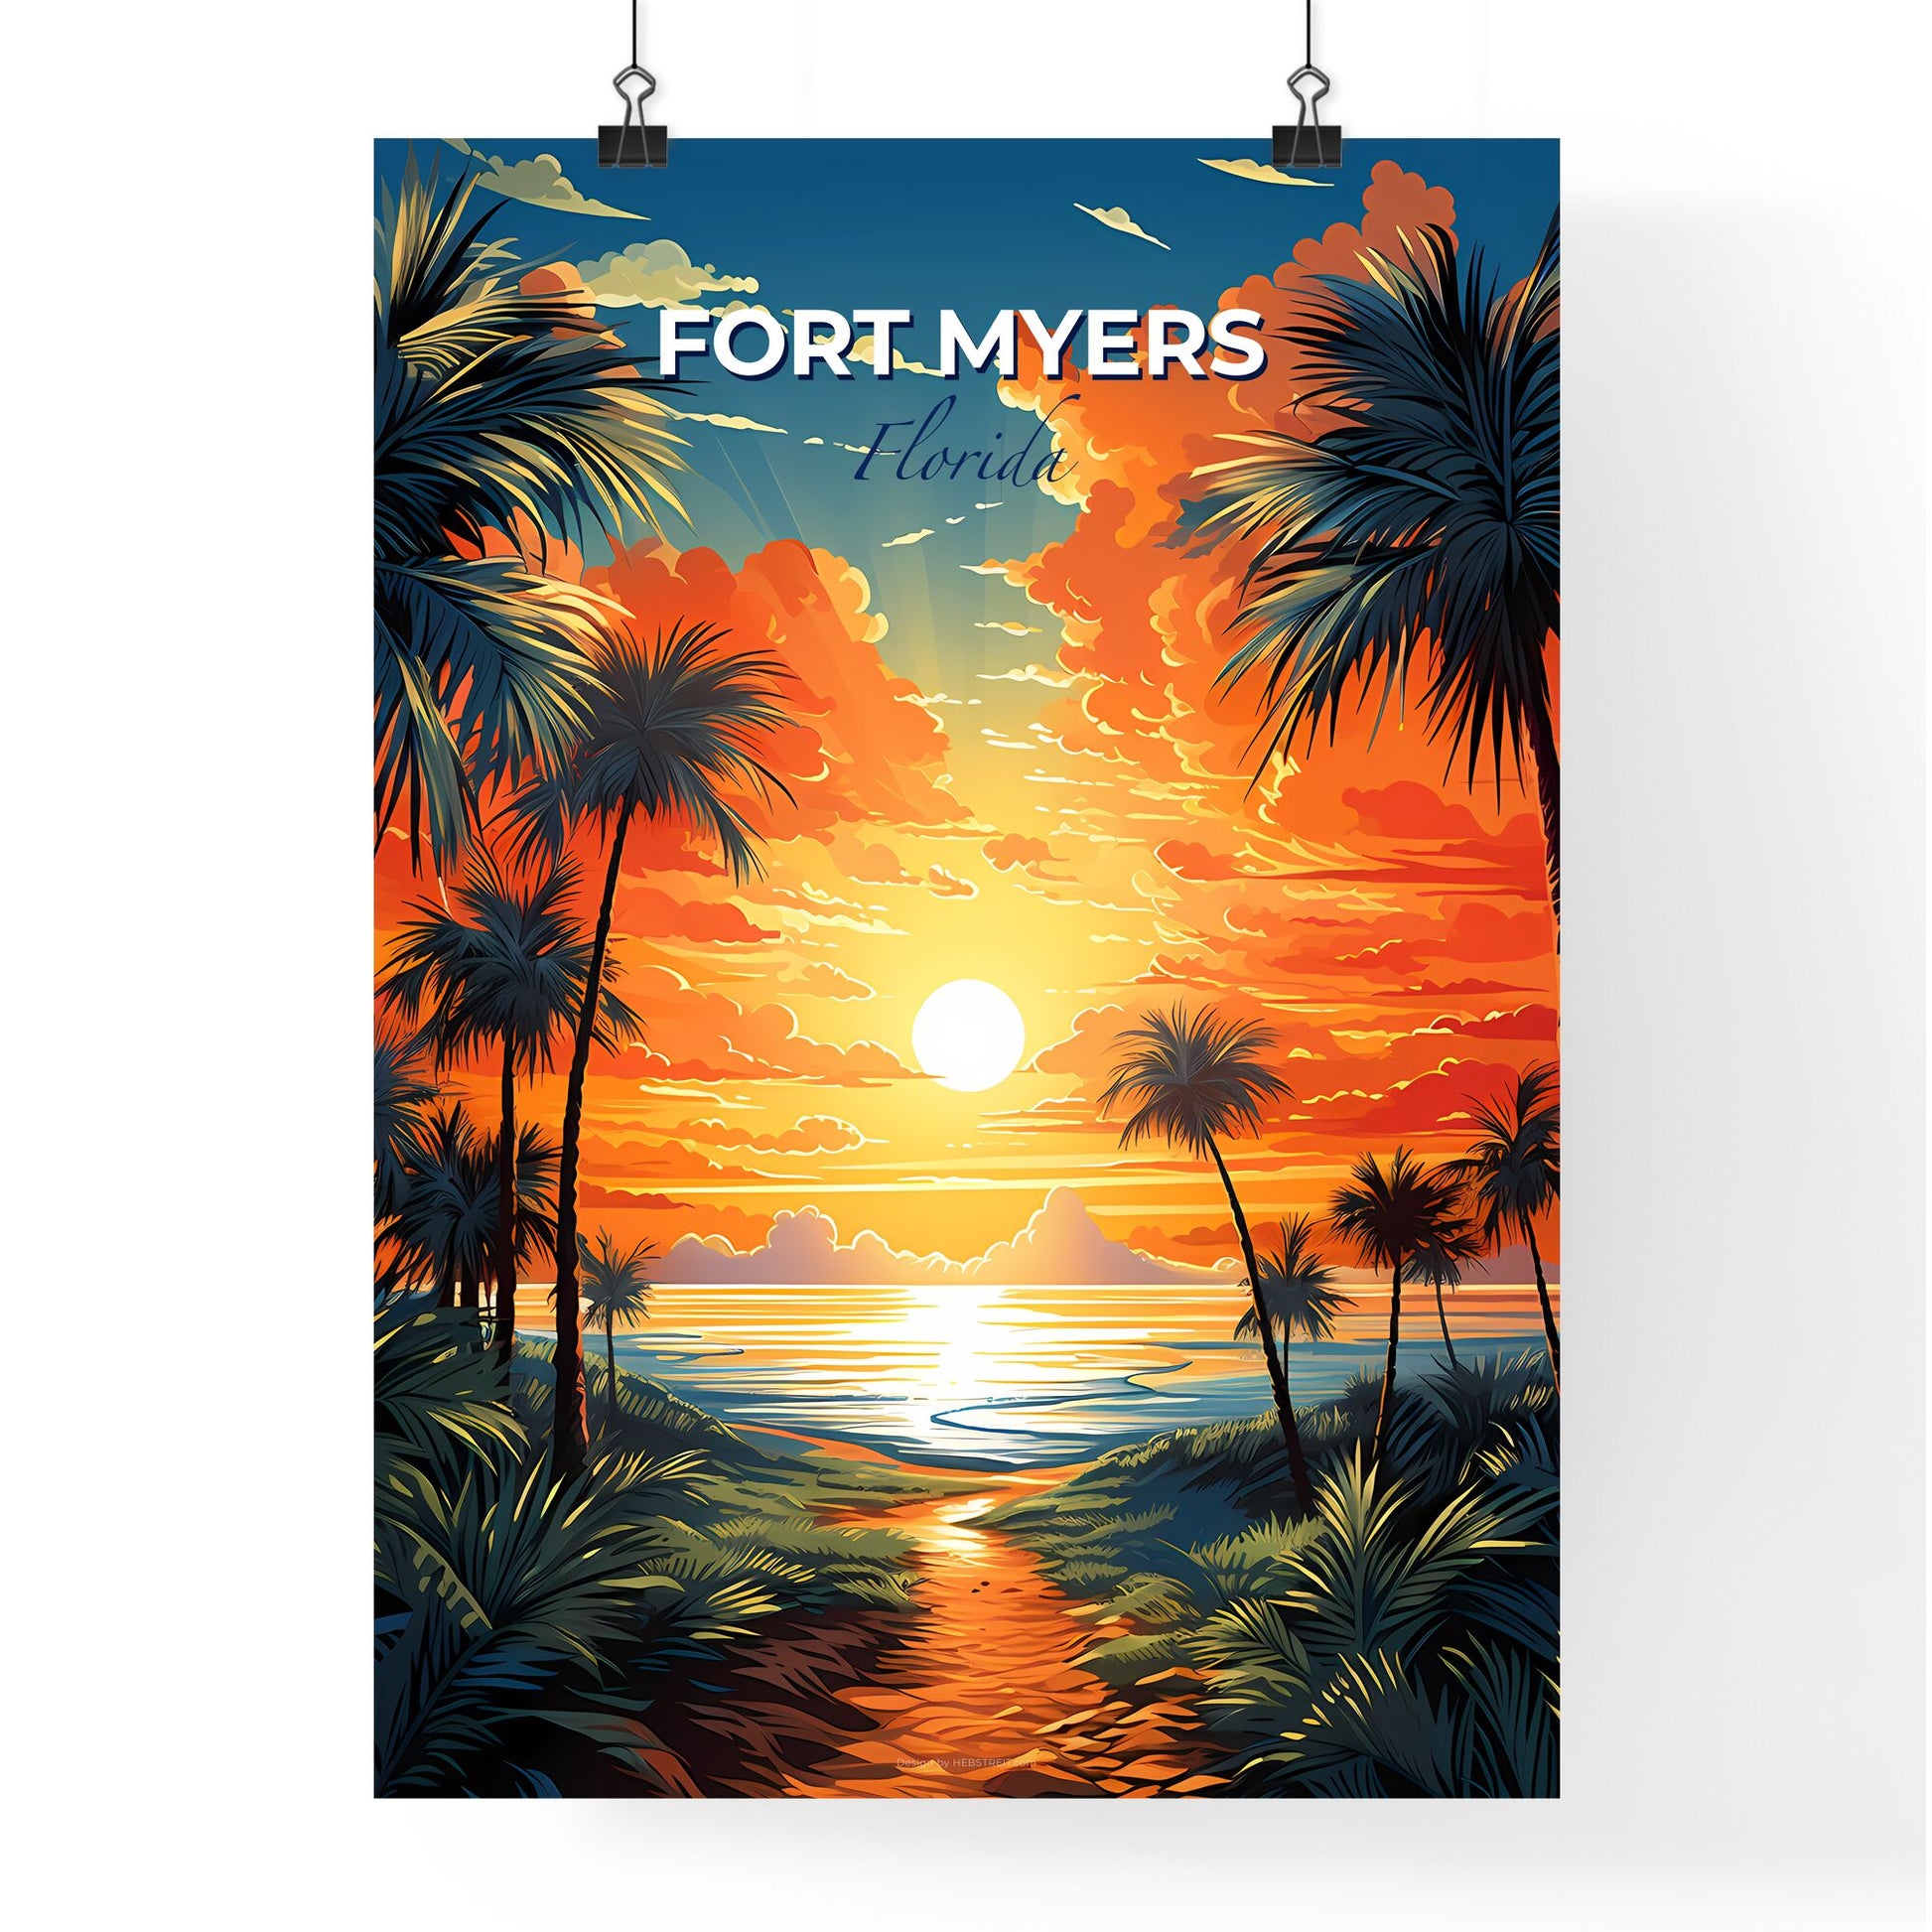 Fort Myers, Florida, A Poster of a sunset over a beach Default Title